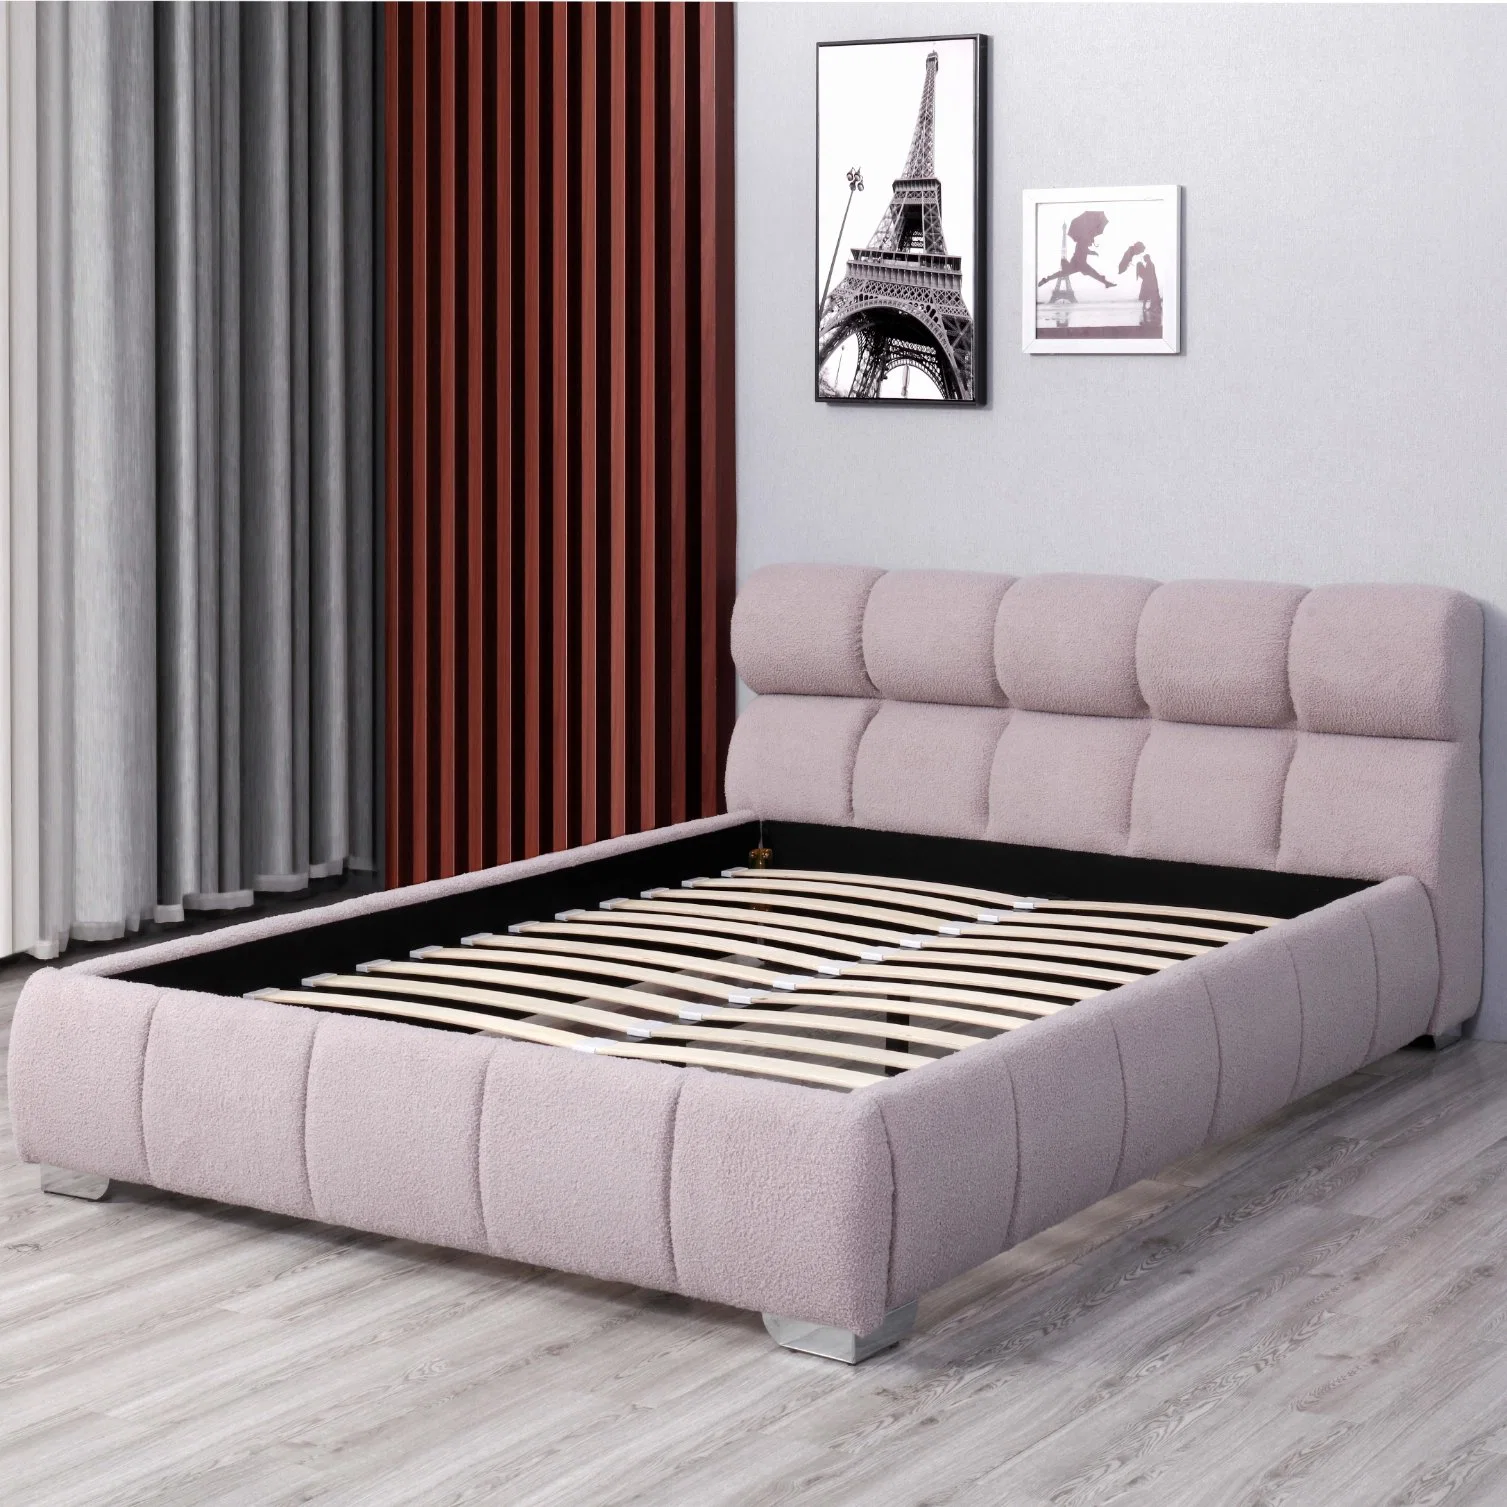 Manufacture Huayang Customized Queen Bedroom King Size Double Beds Frame Bed Velvet Bed OEM